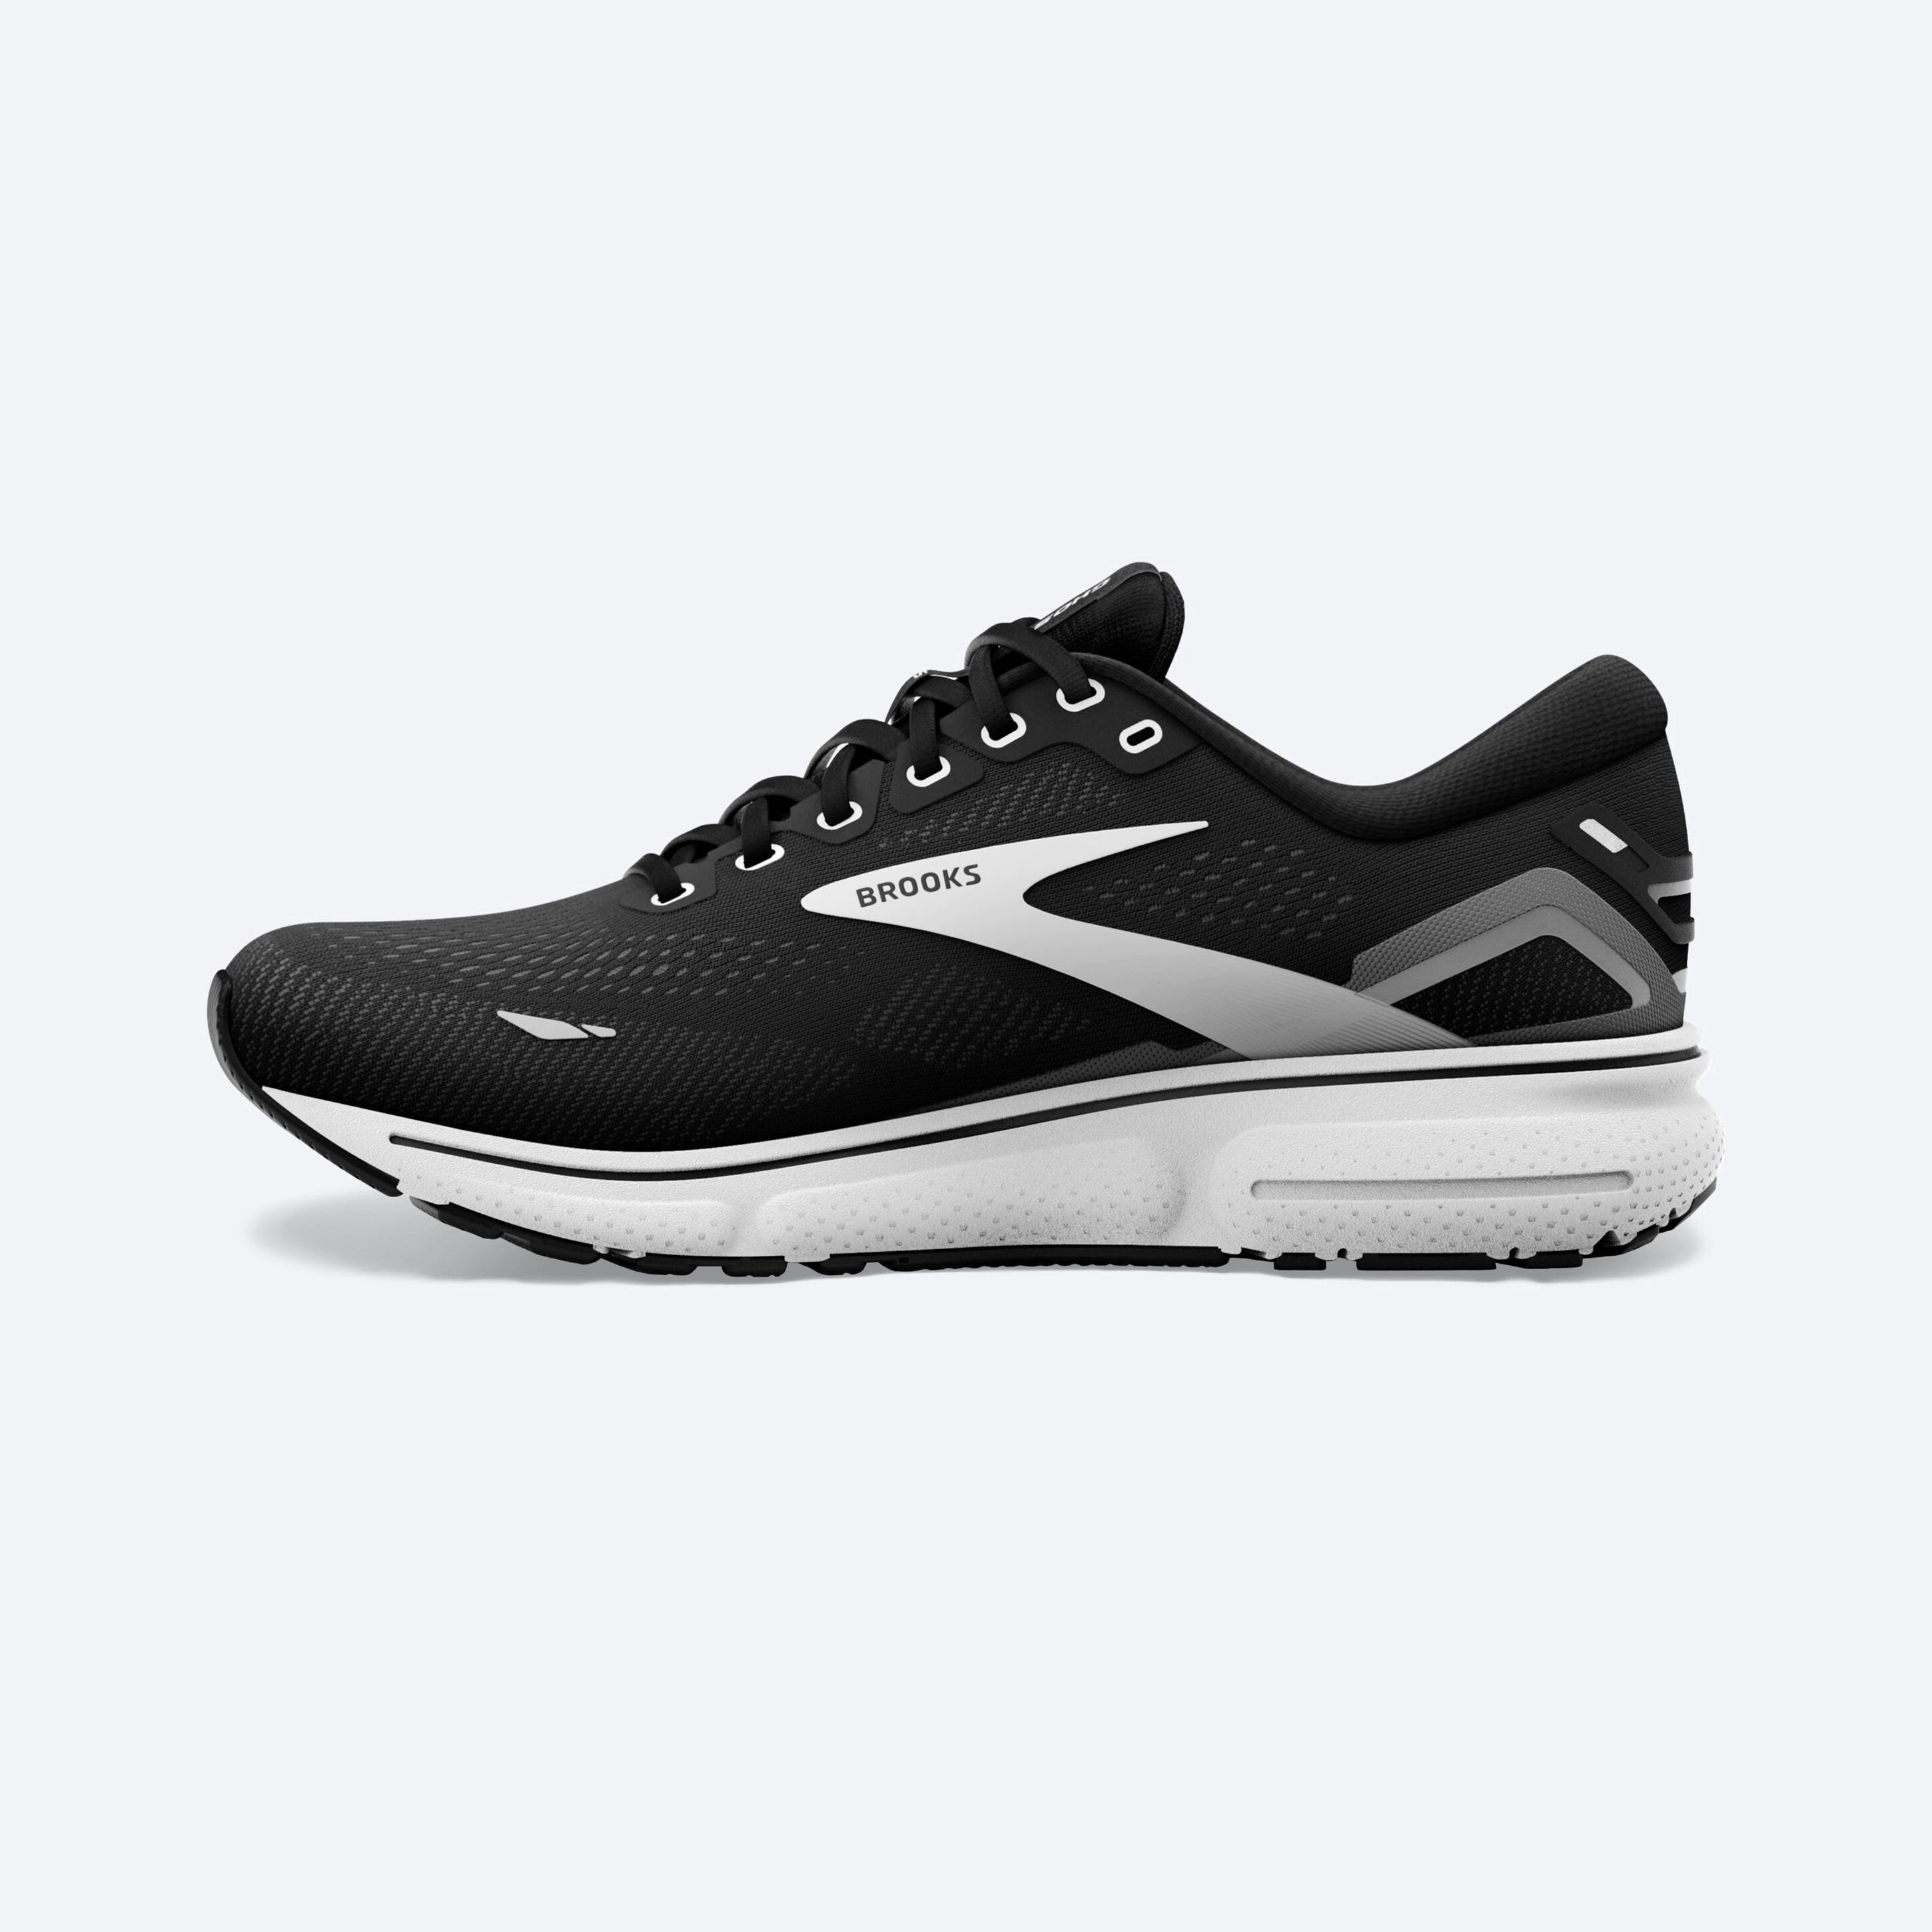 Medial view of the Women's Ghost 15 by Brooks in the color Black/BlackenedPearl/White  